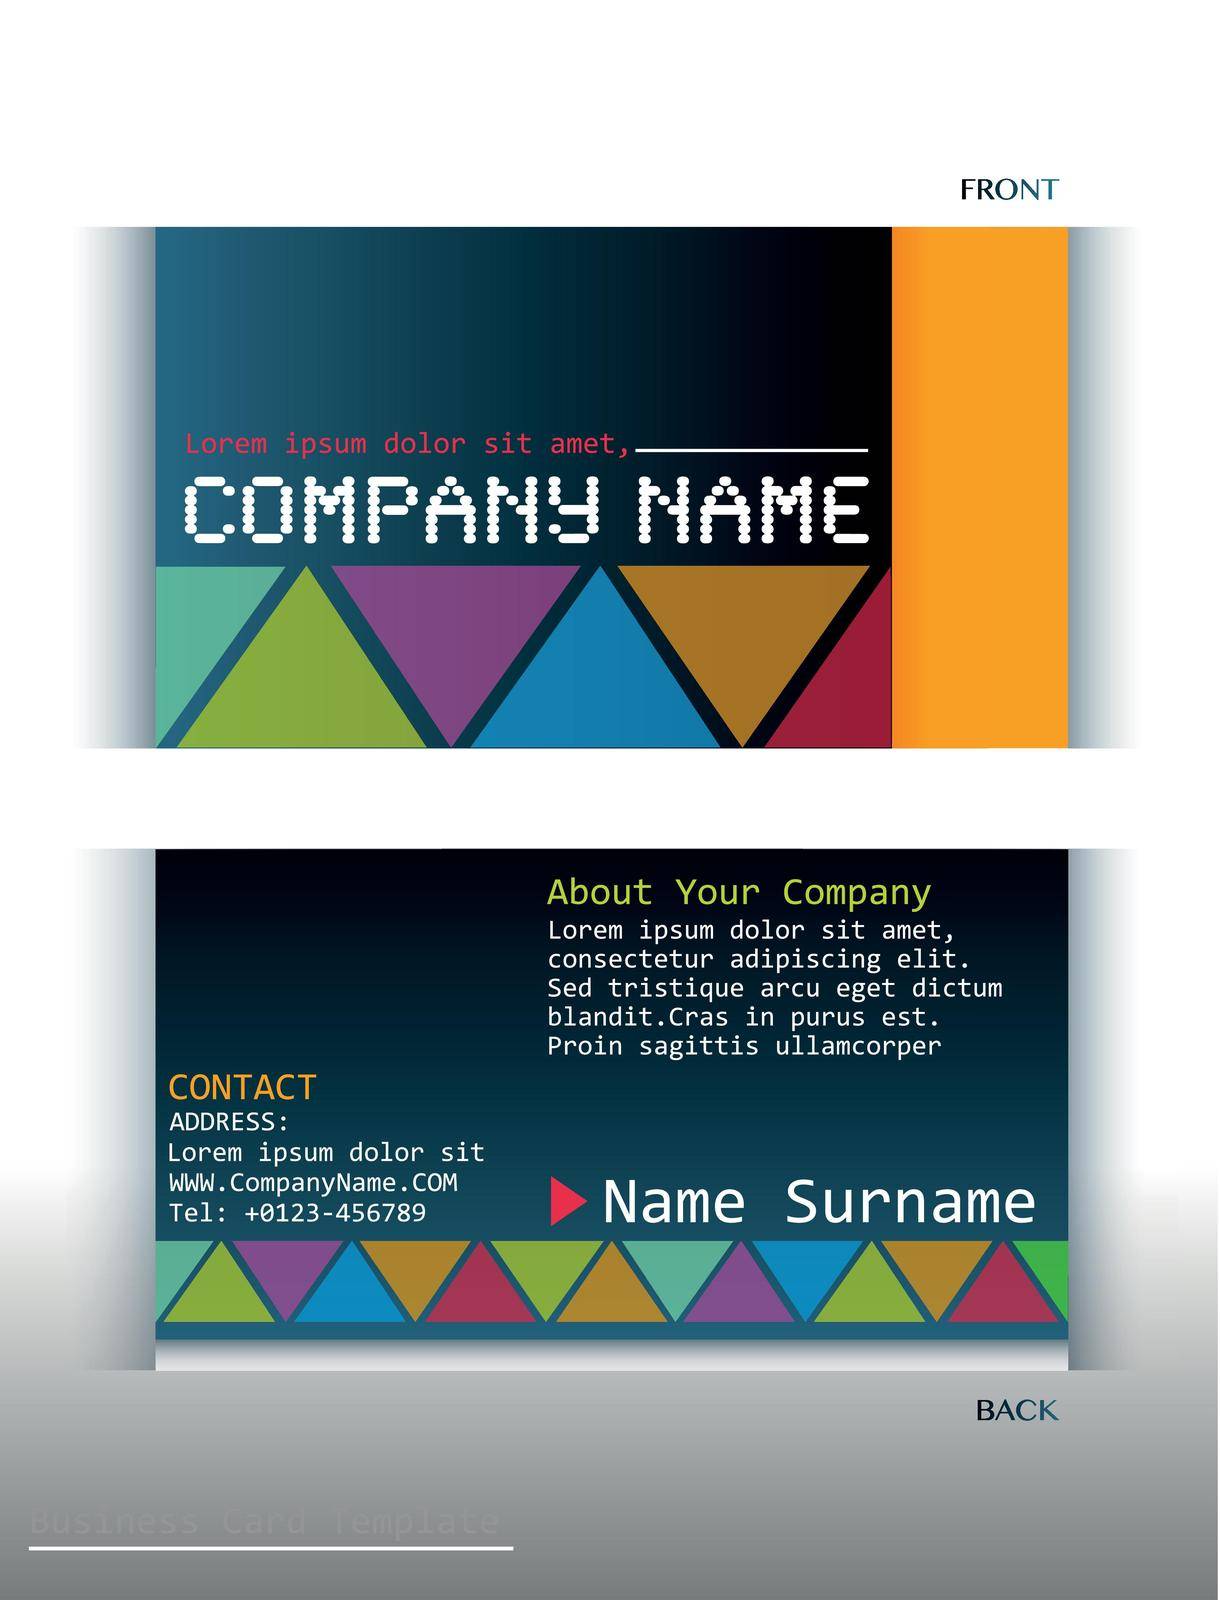 A colourful business card by iimages